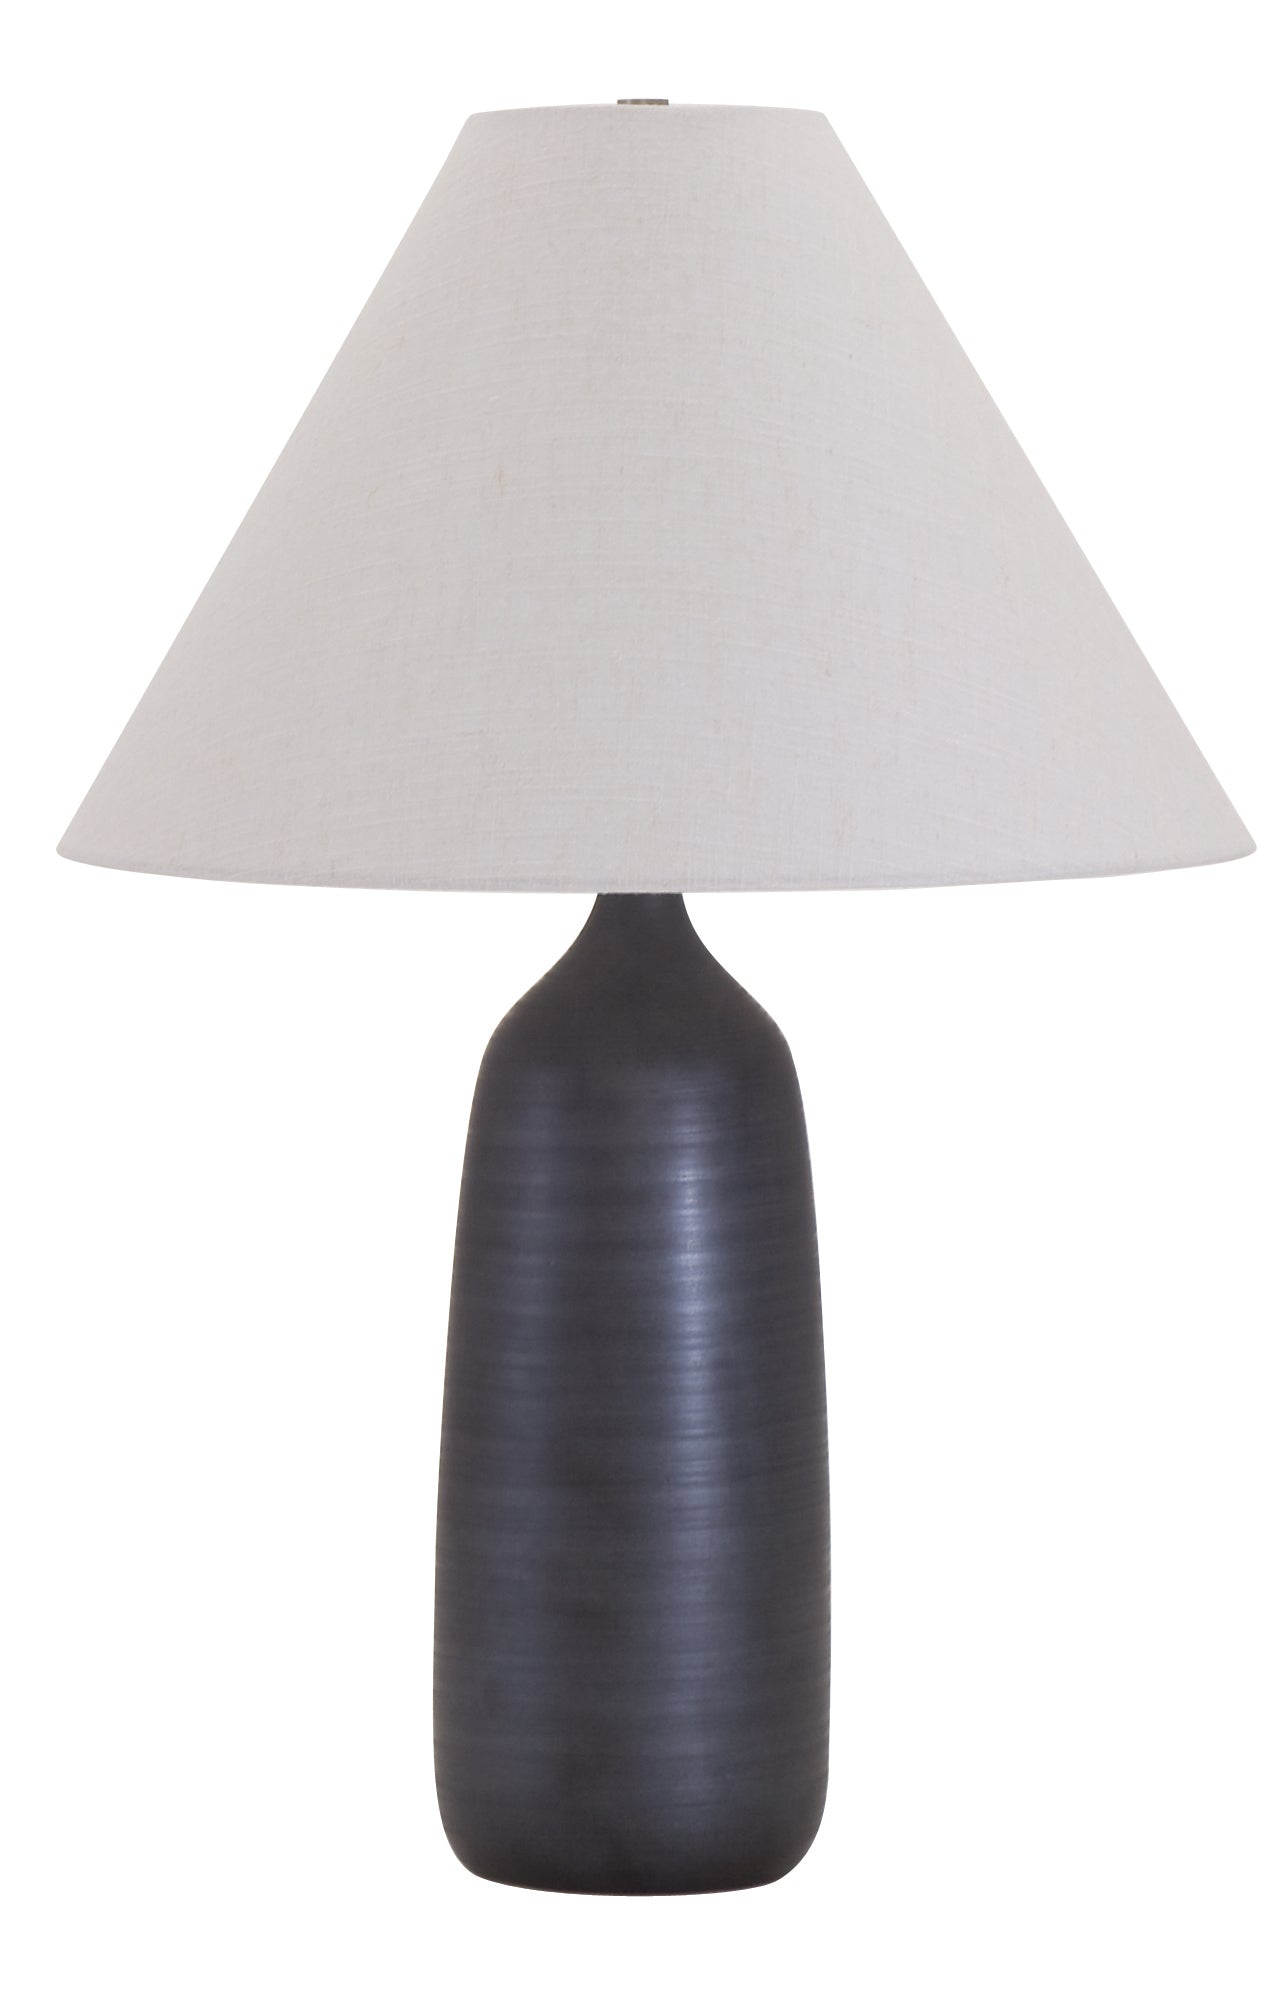 House of Troy Scatchard 25" Stoneware Table Lamp in Black Matte GS100-BM